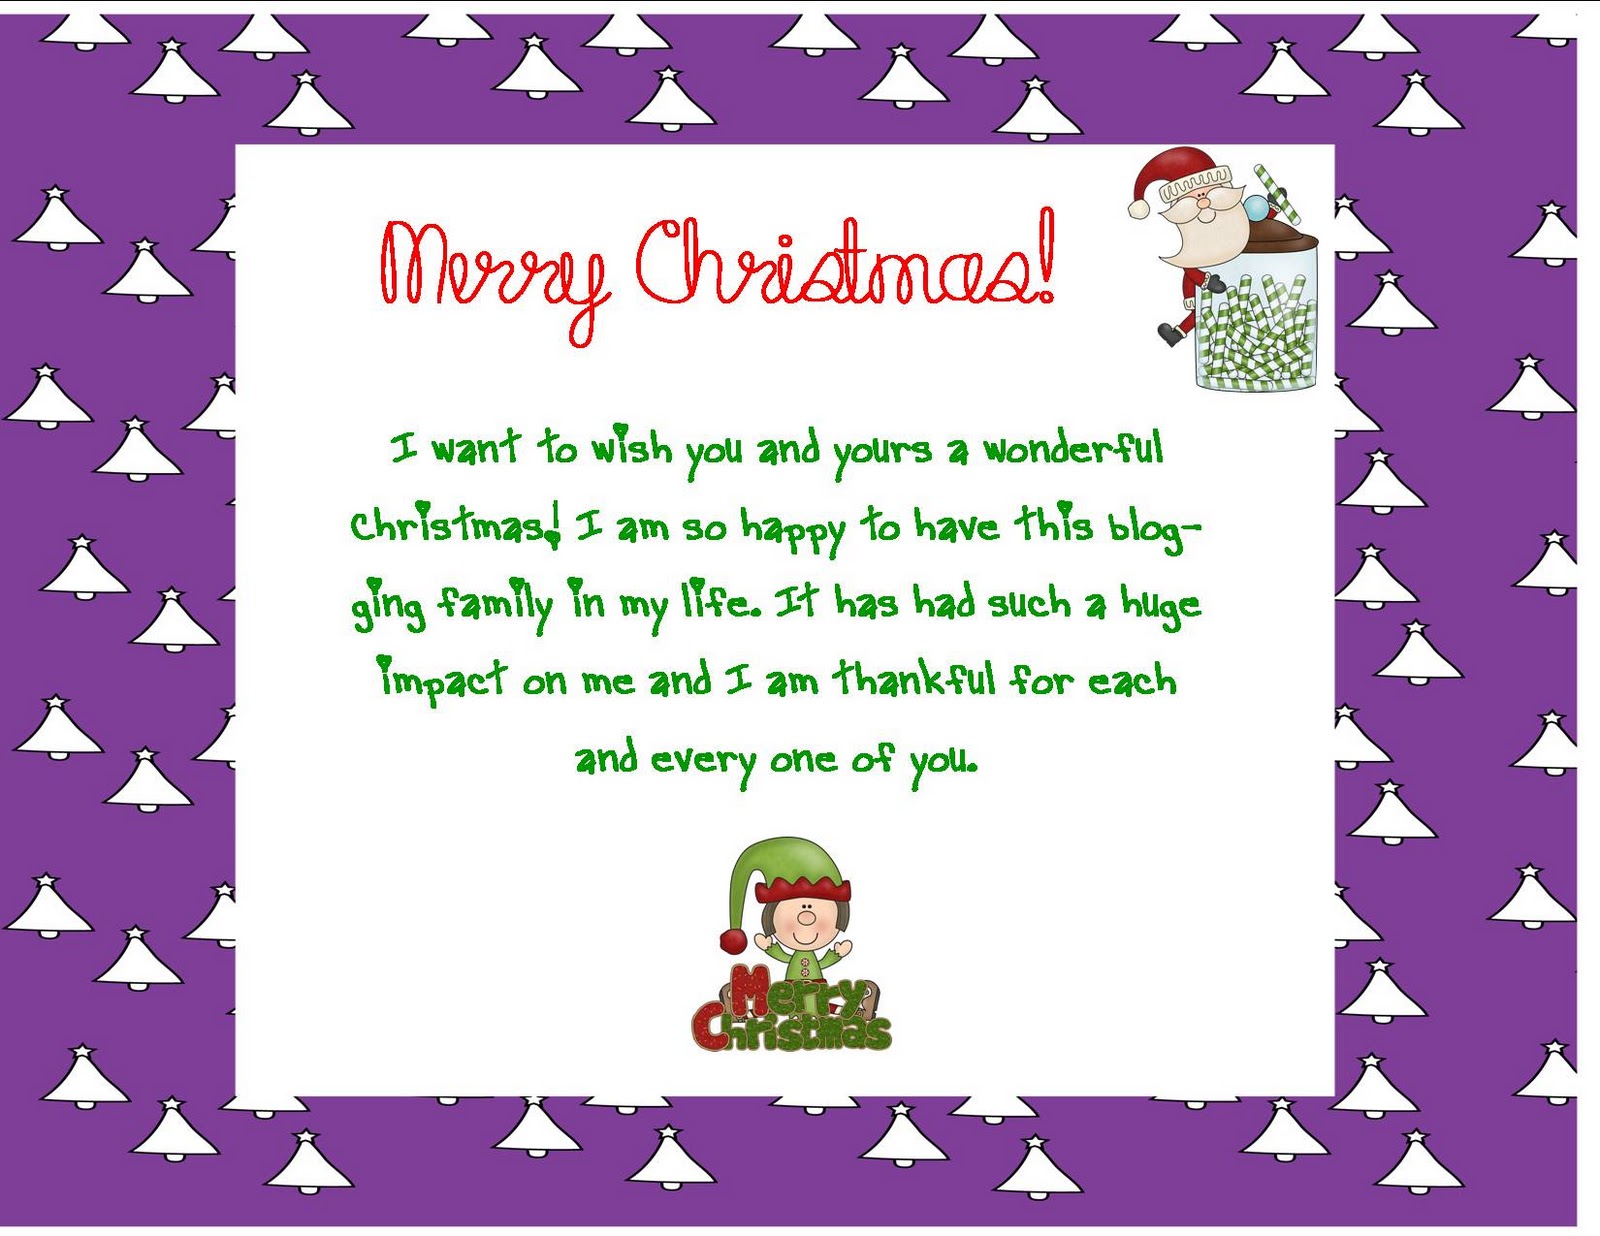 Christmas Card Messages & Wishes For The Holidays